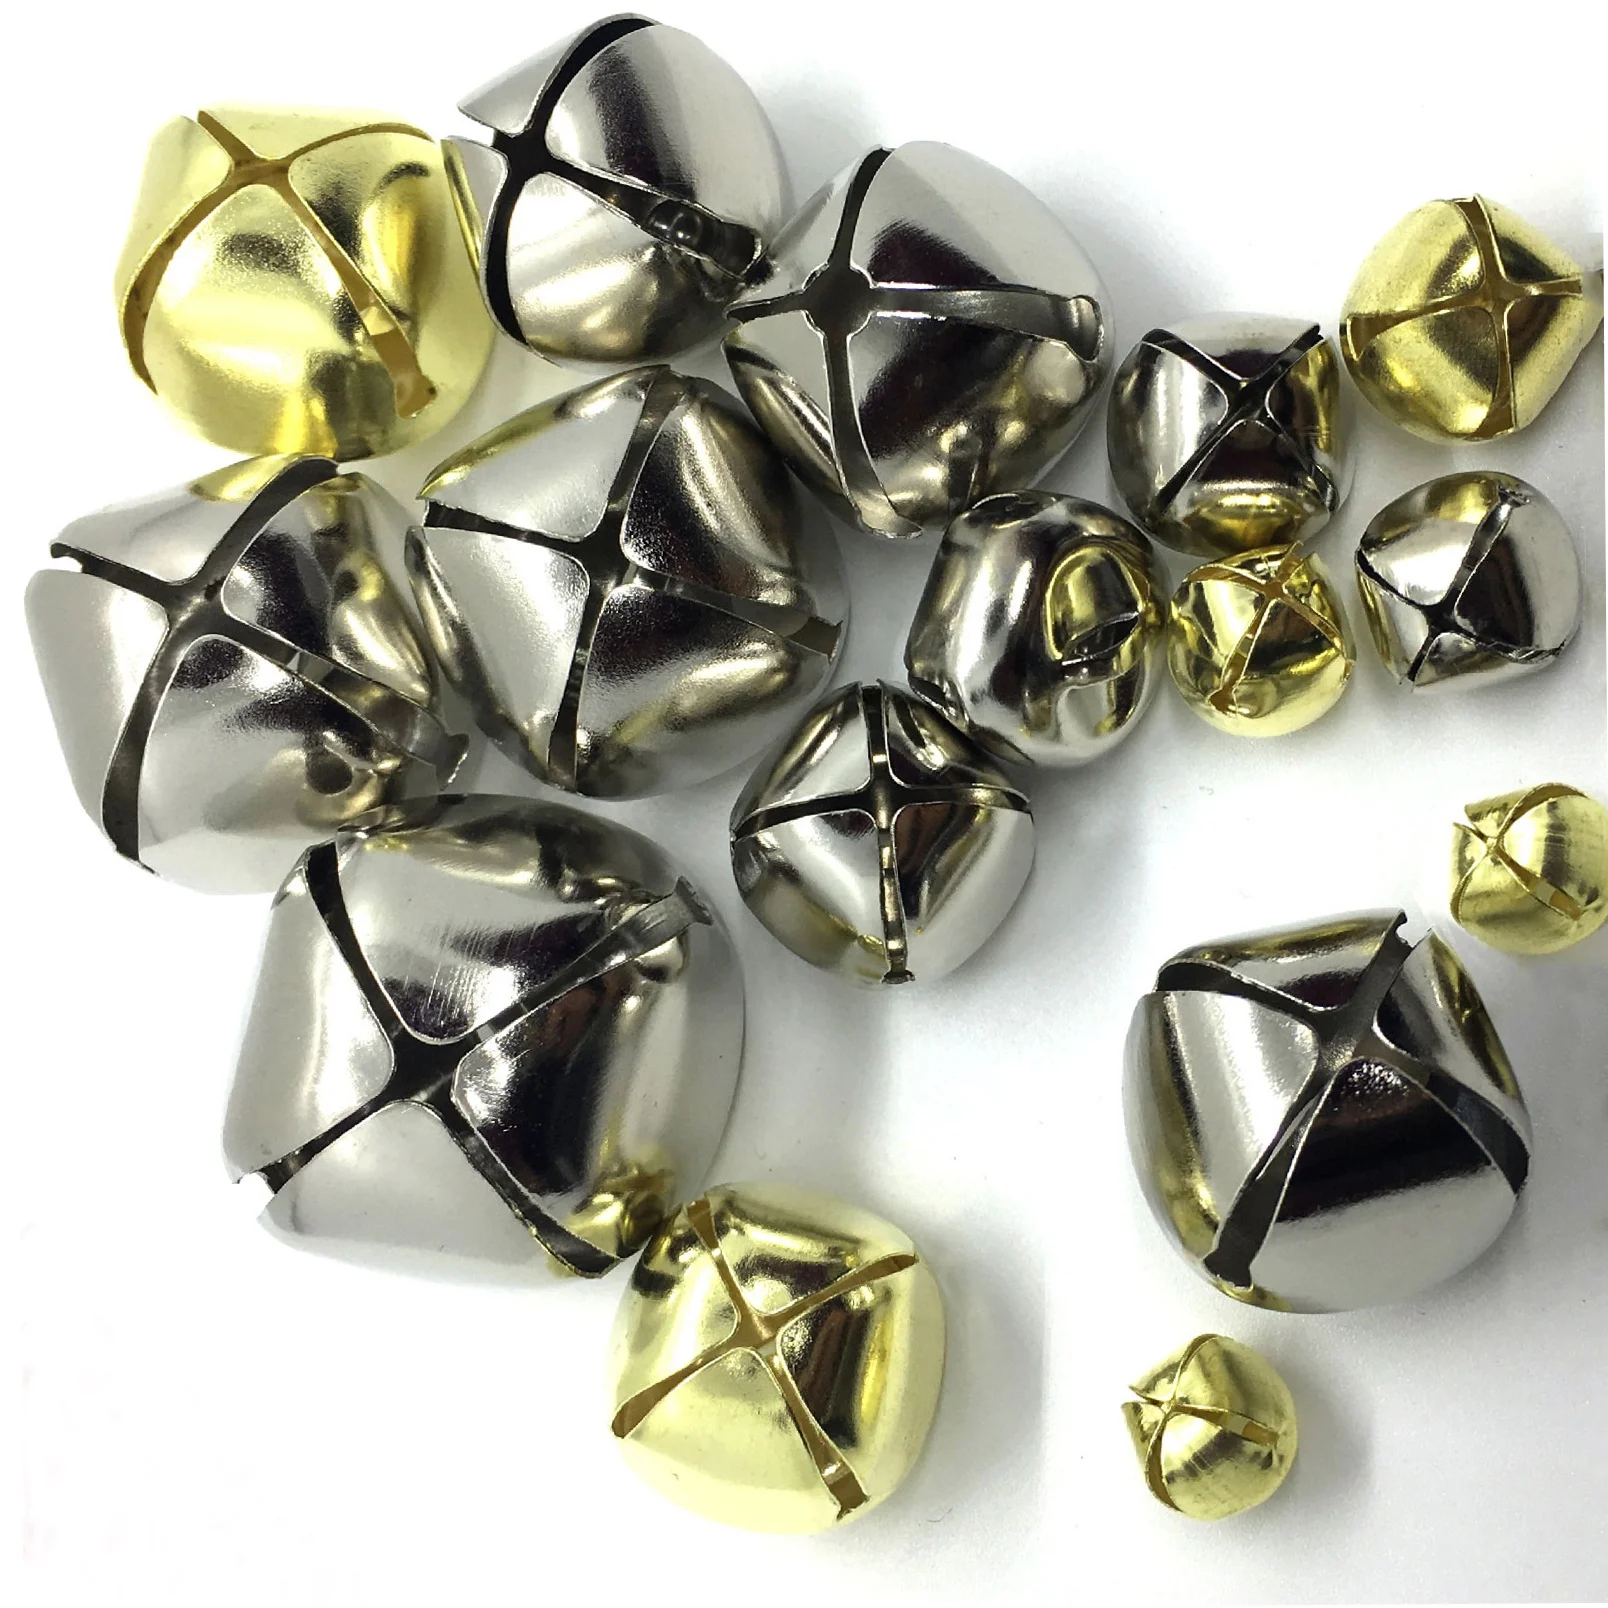 100 Craft Small Bell ,Gold, 16mm 25mm 30mm 35mm for Christmas Decoration  Supply